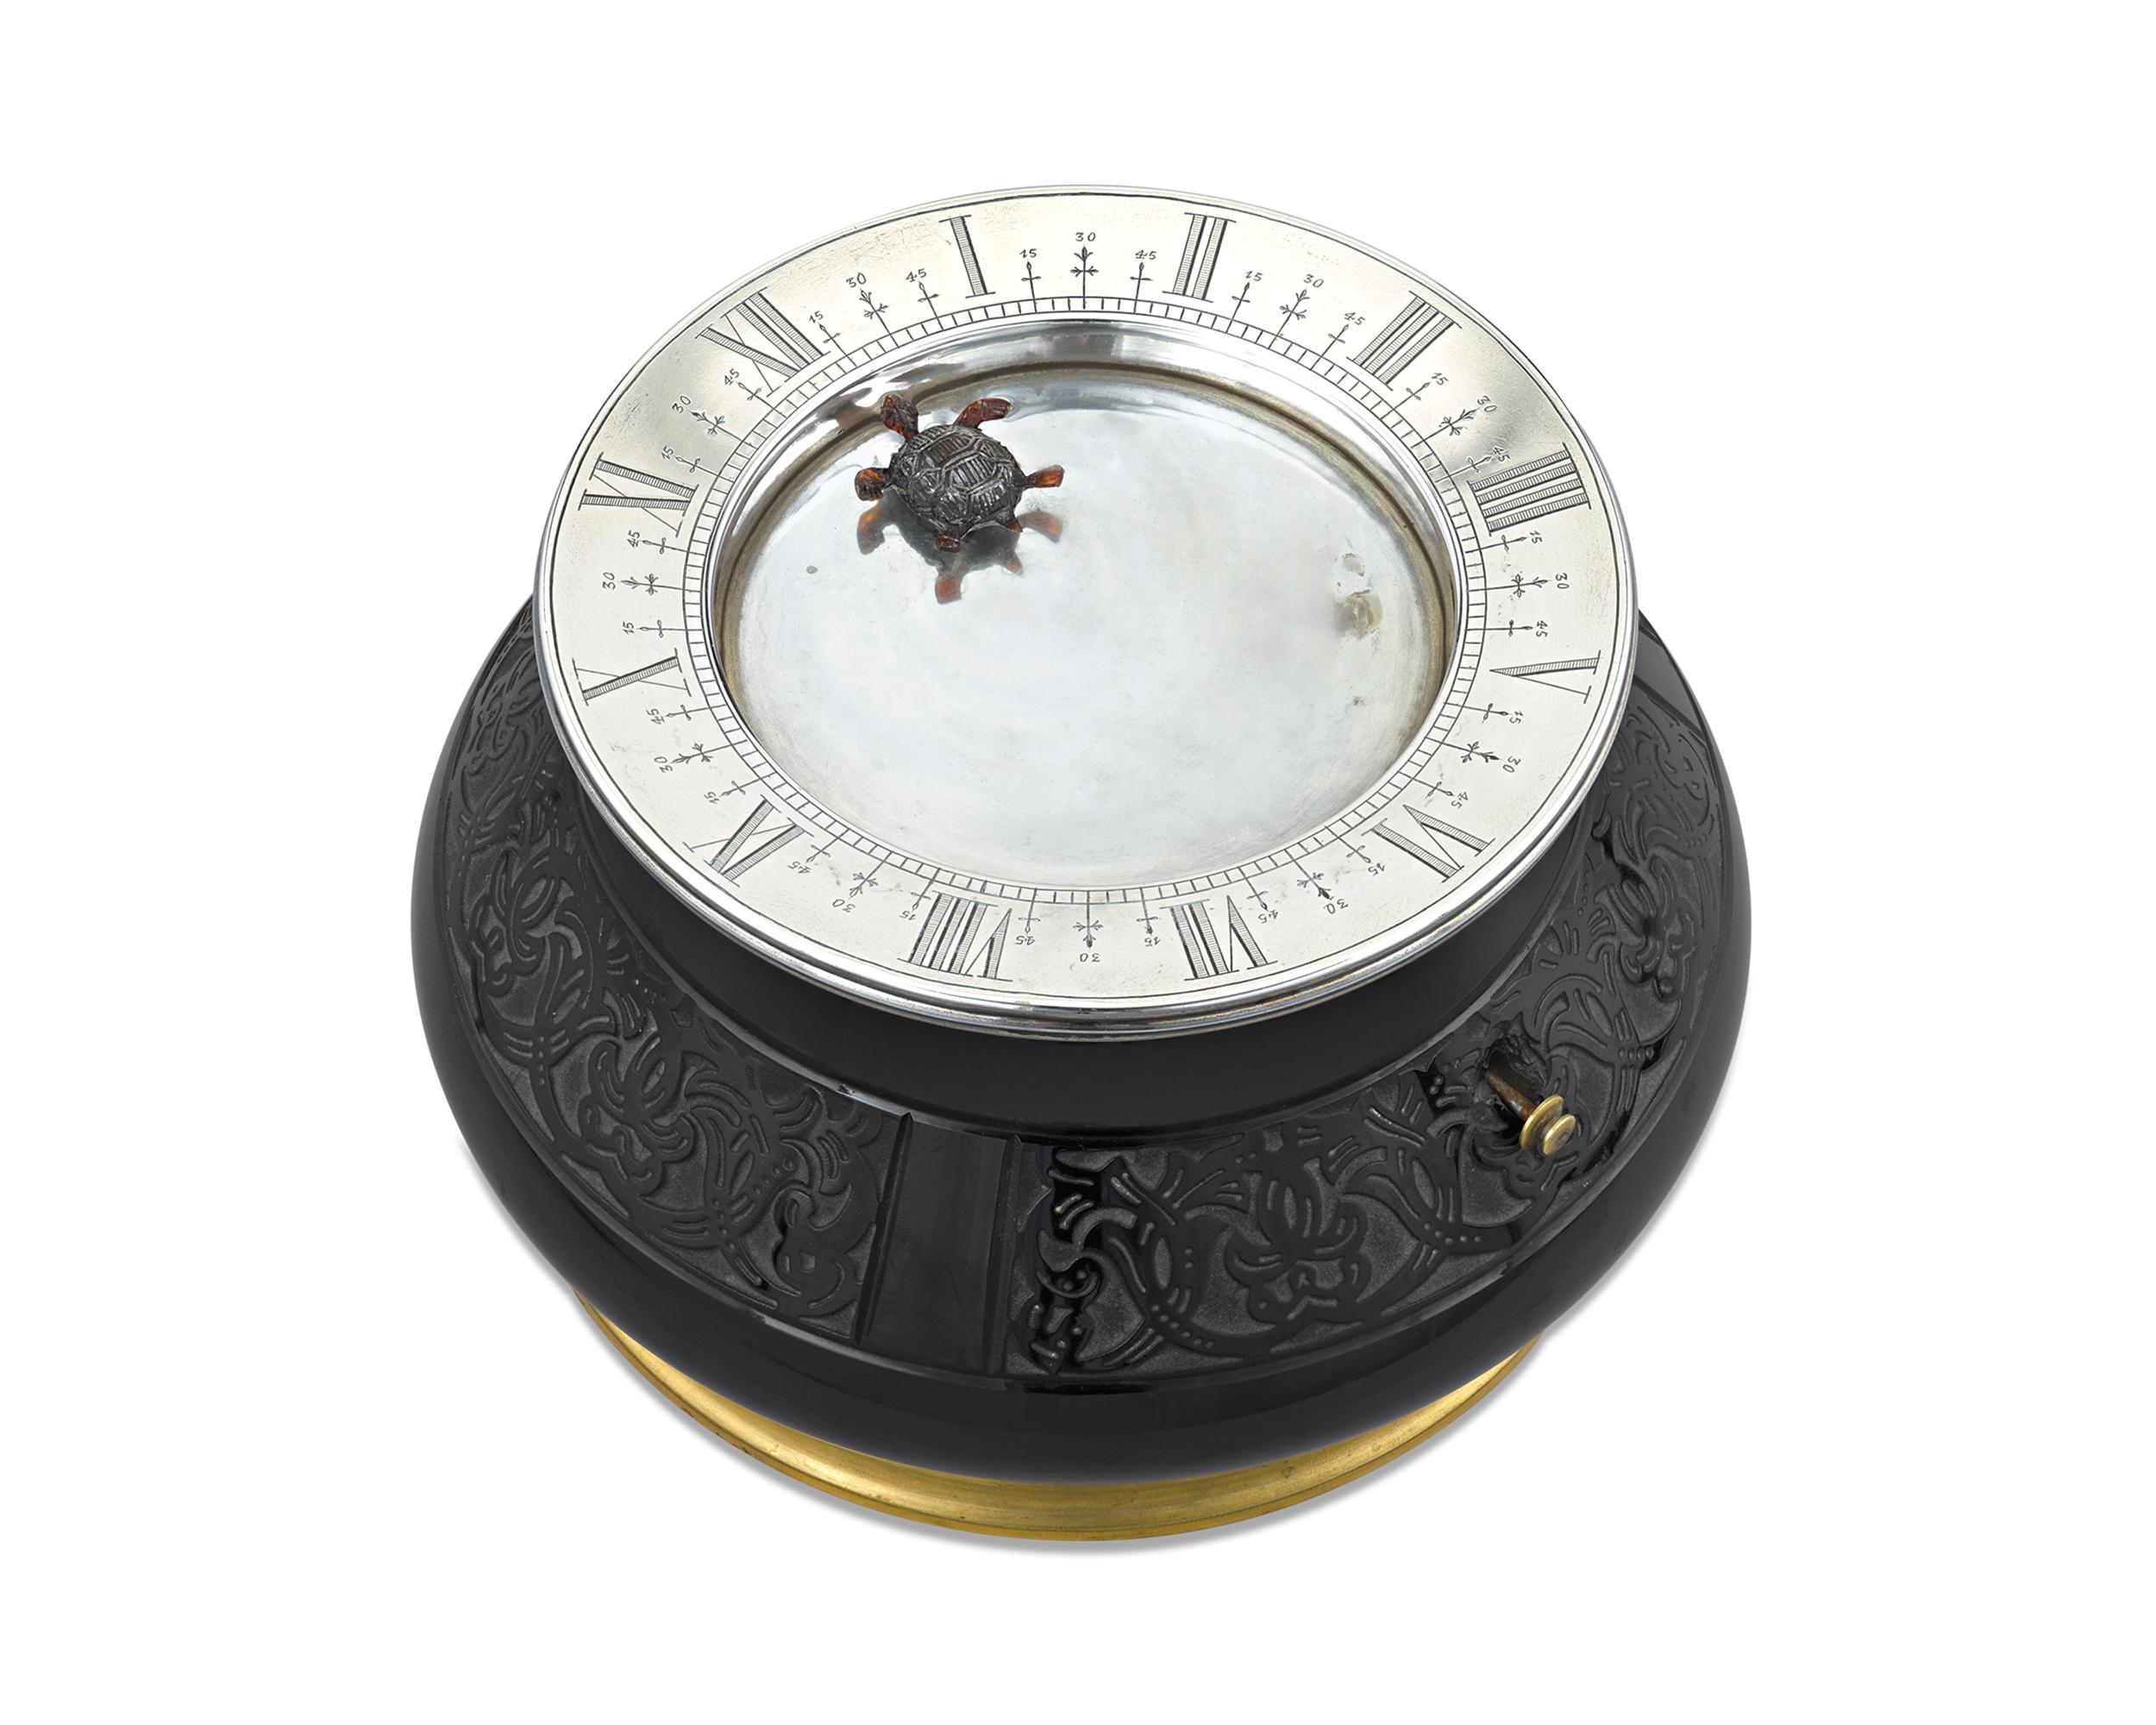 One of the rarest and most sought-after of the great mystery clocks, the Gübelin turtle mystery water clock is a true wonder of horology. This timepiece was created during the Art Deco era and features a charming turtle that, when the basin is